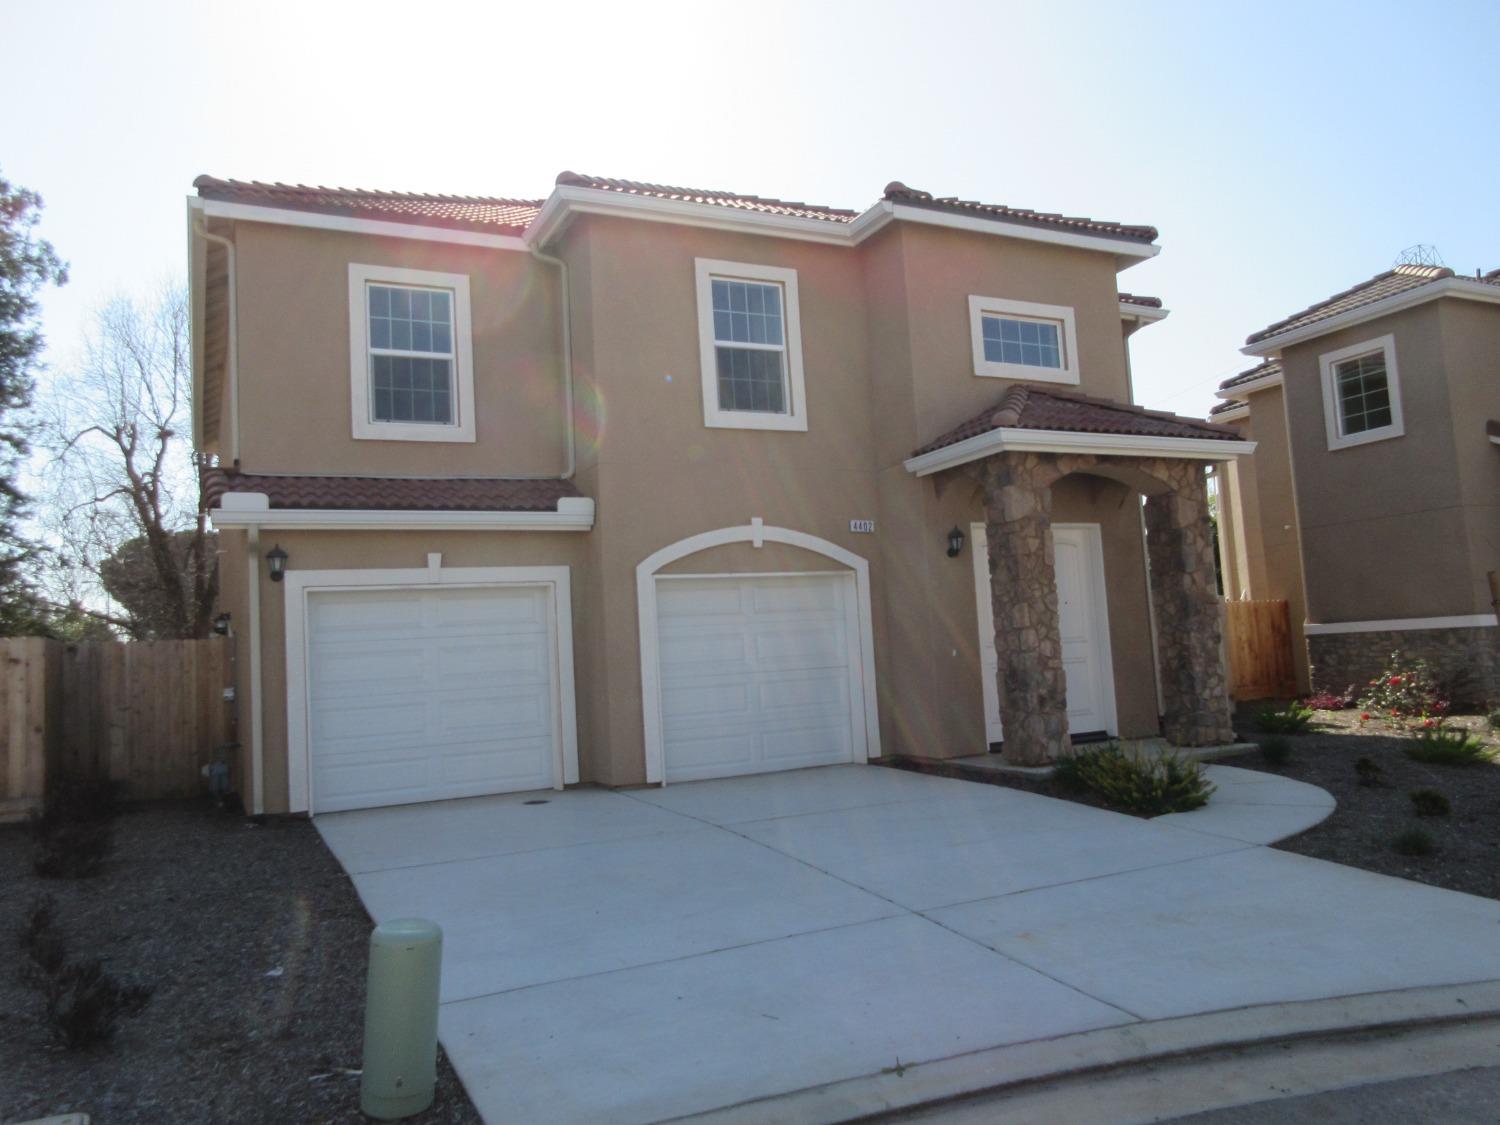 Photo of 4402 W Langden Dr #Lot19 in Fresno, CA